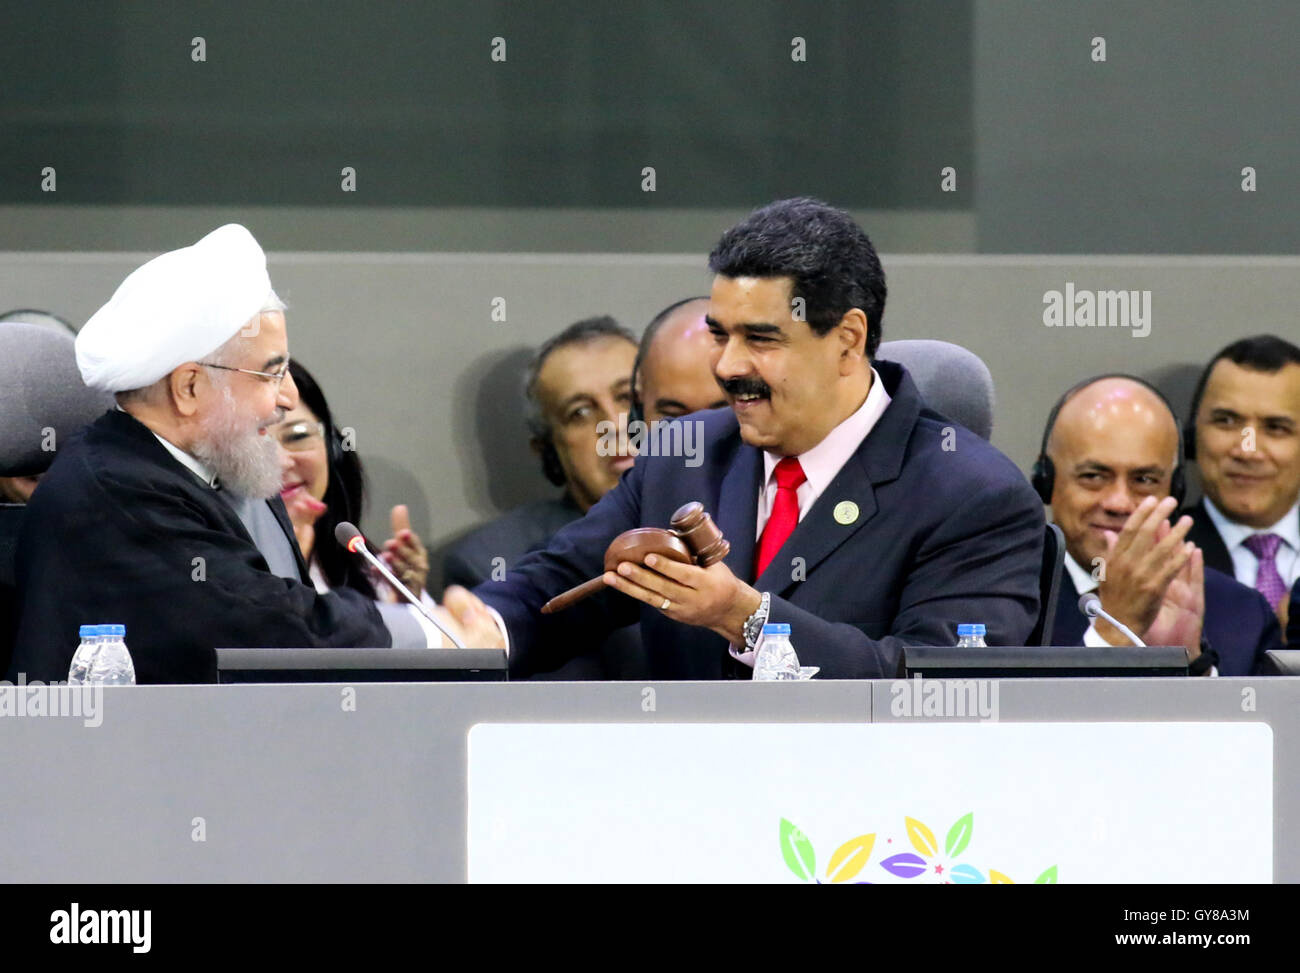 Margarita, Venezuela. 17th Sept, 2016.  Venezuela's President Nicolas Maduro (R, front) shakes hands with Iranian President Hassan Rouhani at Hugo Chavez Frias Convention Center in Margarita Island, Venezuela, on Sept. 17, 2016. Iran officially handed over the three-year rotating presidency of the Non-Aligned Movement (NAM) to Venezuela at the 17th NAM Summit held Saturday in Venezuela's Margarita Island. (Xinhua/Presidential Press/AVN) (jp) (fnc)(yy) Credit:  Xinhua/Alamy Live News Stock Photo